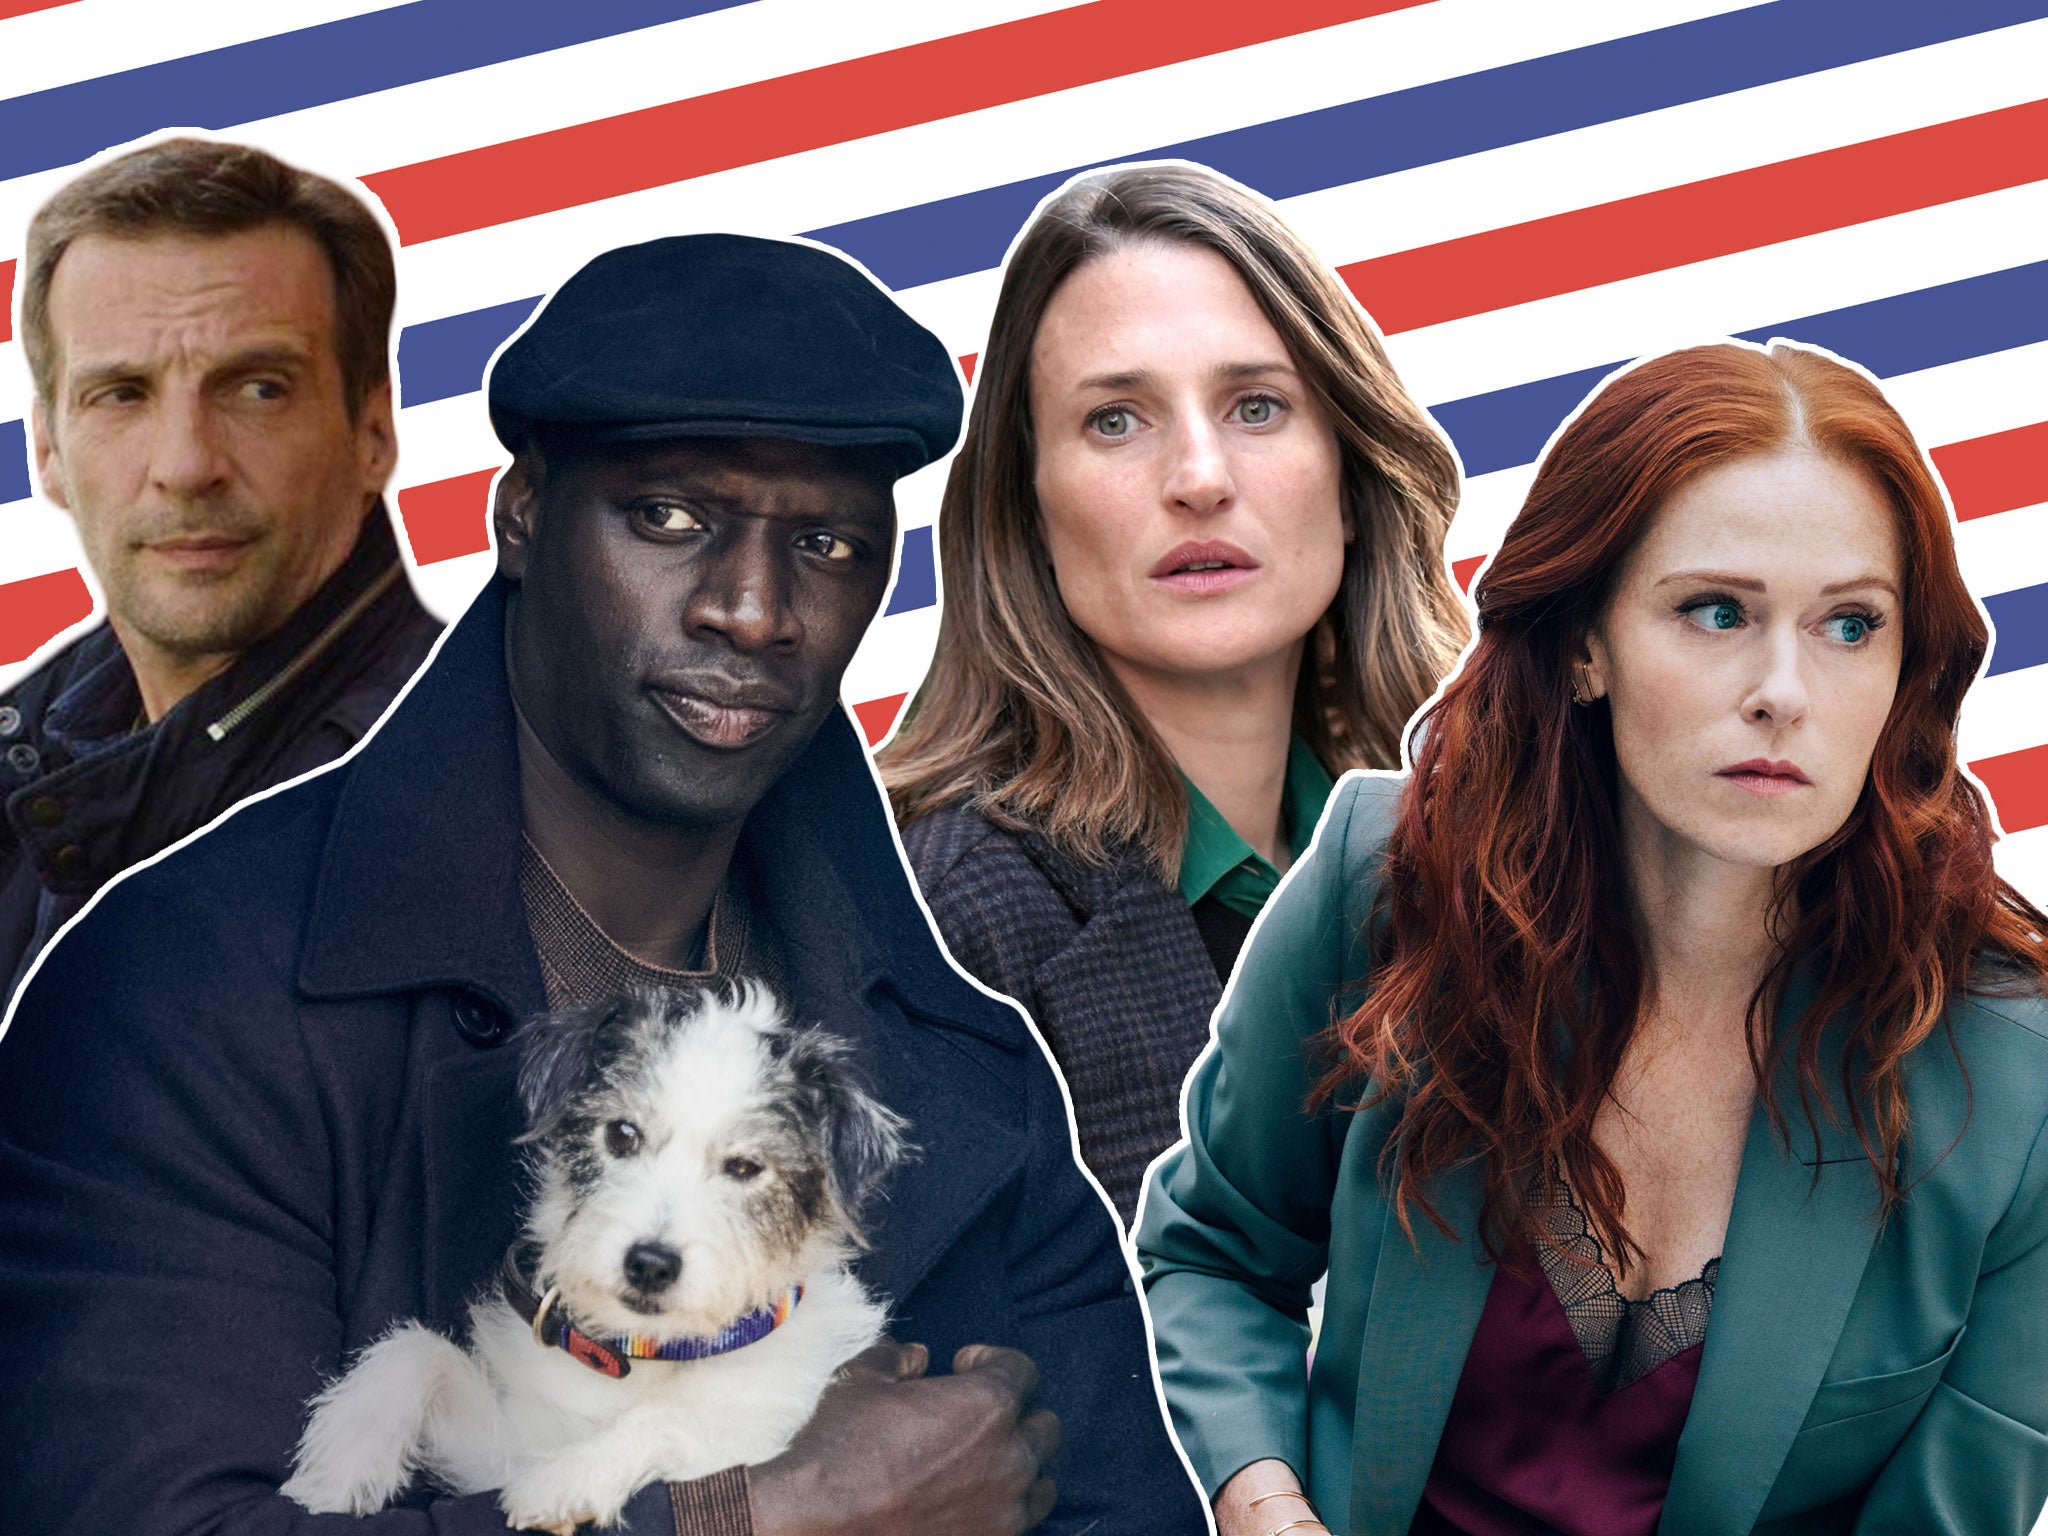 Stars de la télévision! Mathieu Kassovitz in ‘Le Bureau’, Omar Sy in ‘Lupin’, Camille Cottin in ‘Call My Agent!’ and Audrey Fleurot in ‘Spiral’